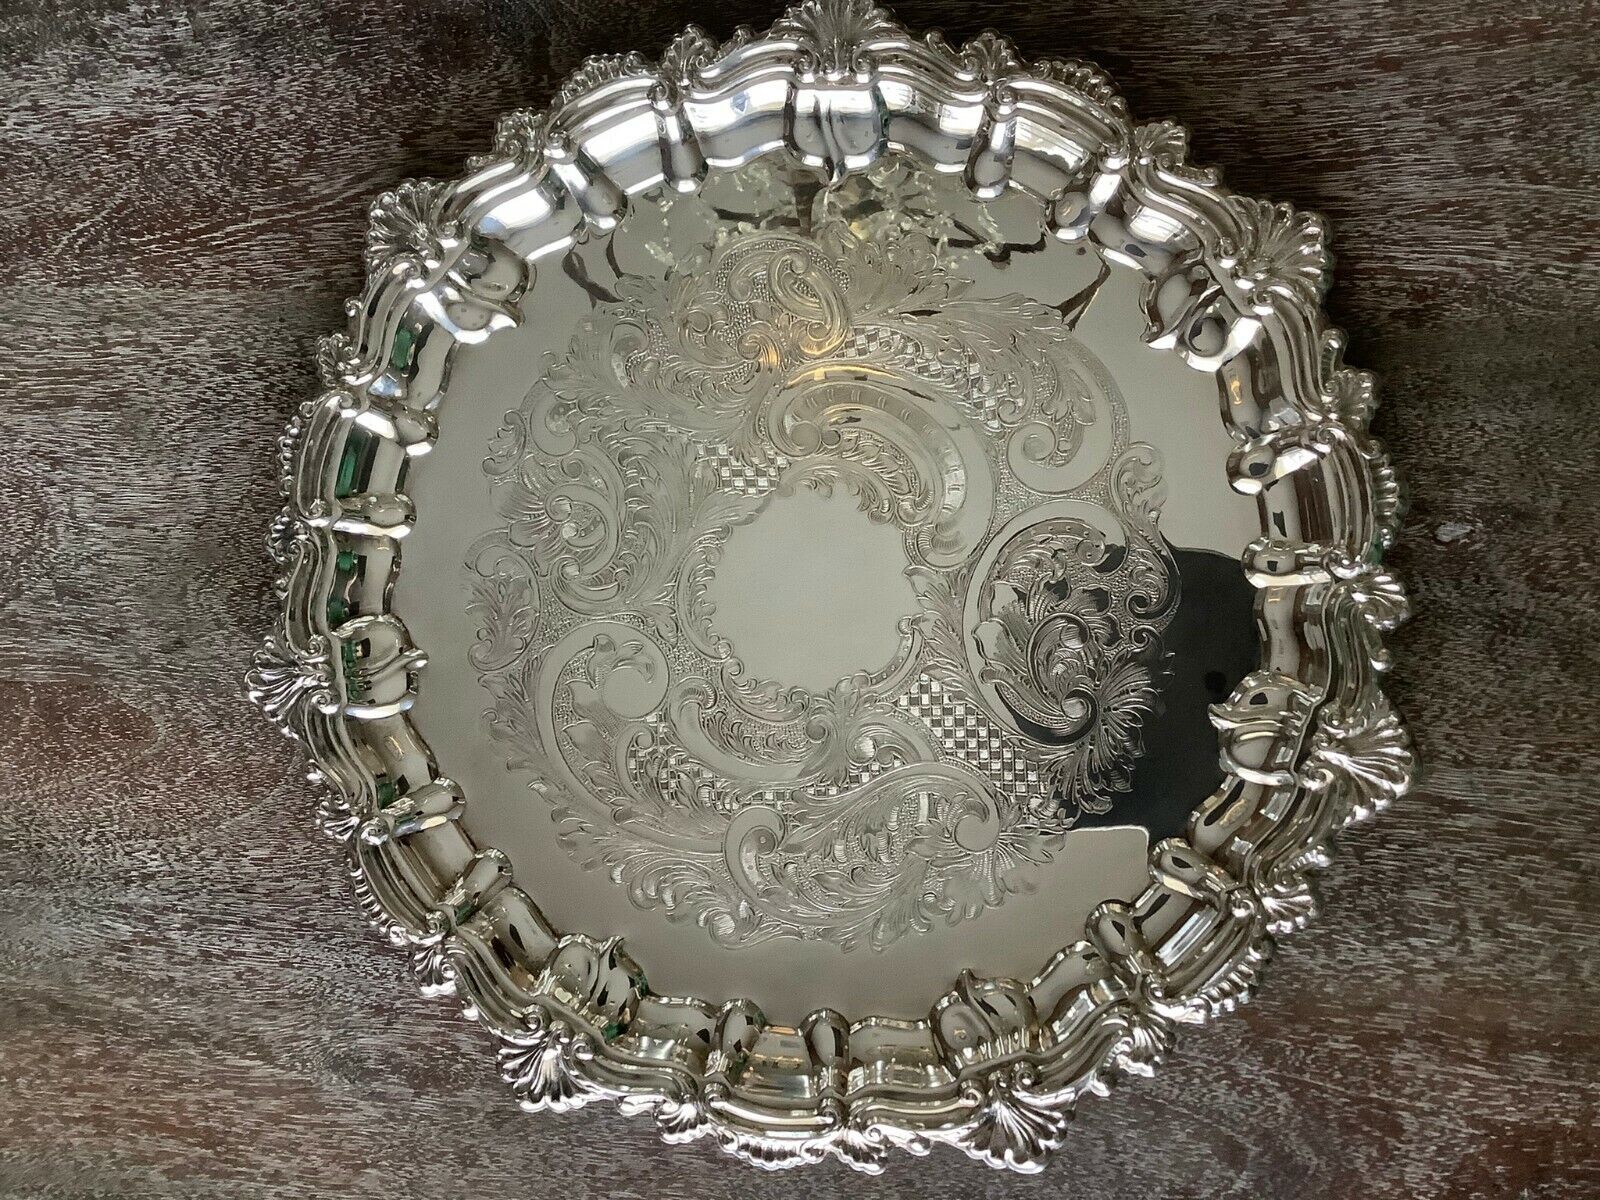 WM ROGERS - 15" ROUND SILVERPLATE TRAY - "ENGLISH SHELL"  - #1372 - Exc Cond